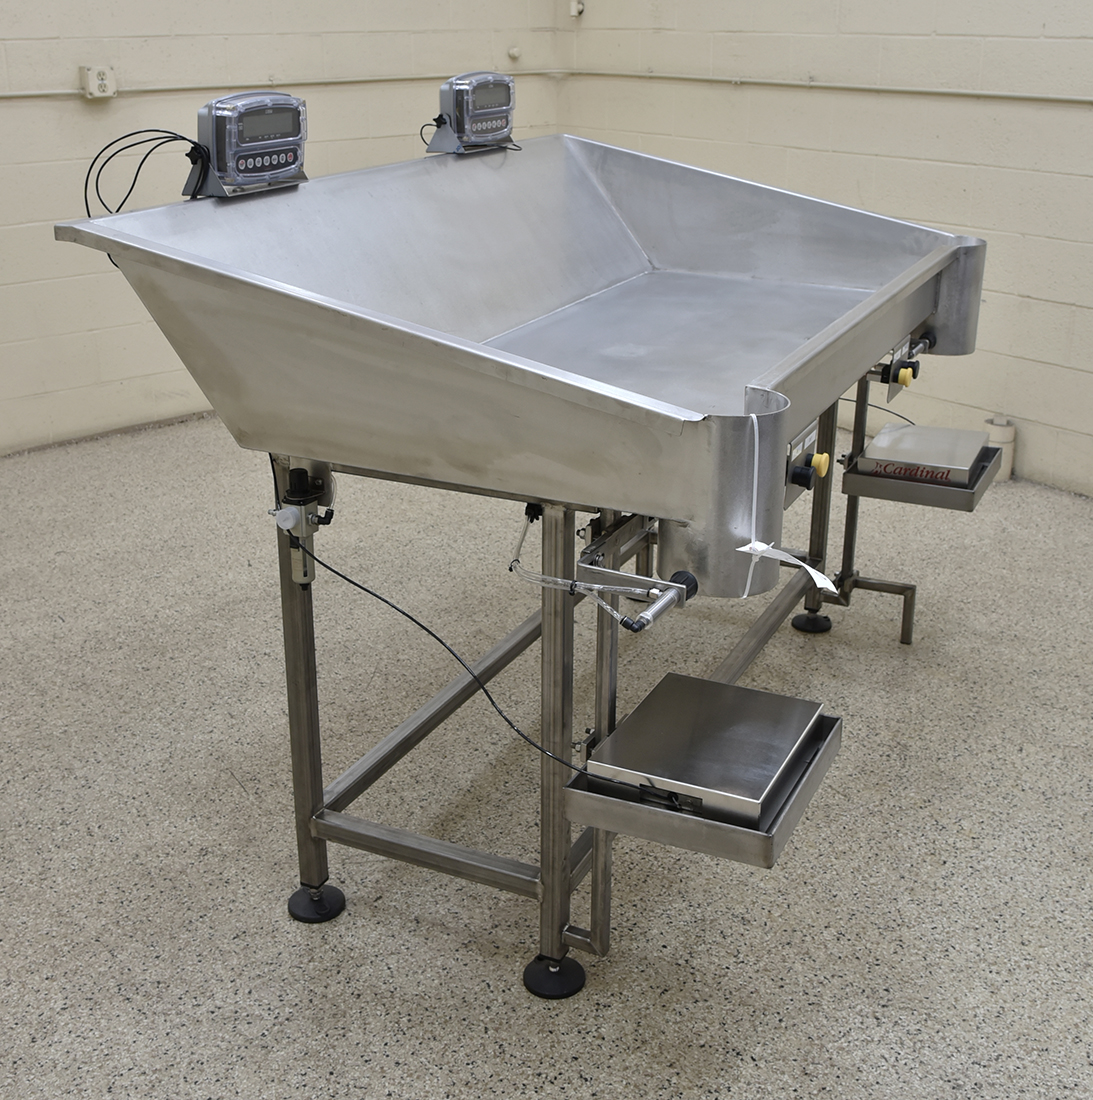 Fresh-cut produce BAG FILLING TABLE, 2-station, stainless steel, in-stock, Alard item Y5432